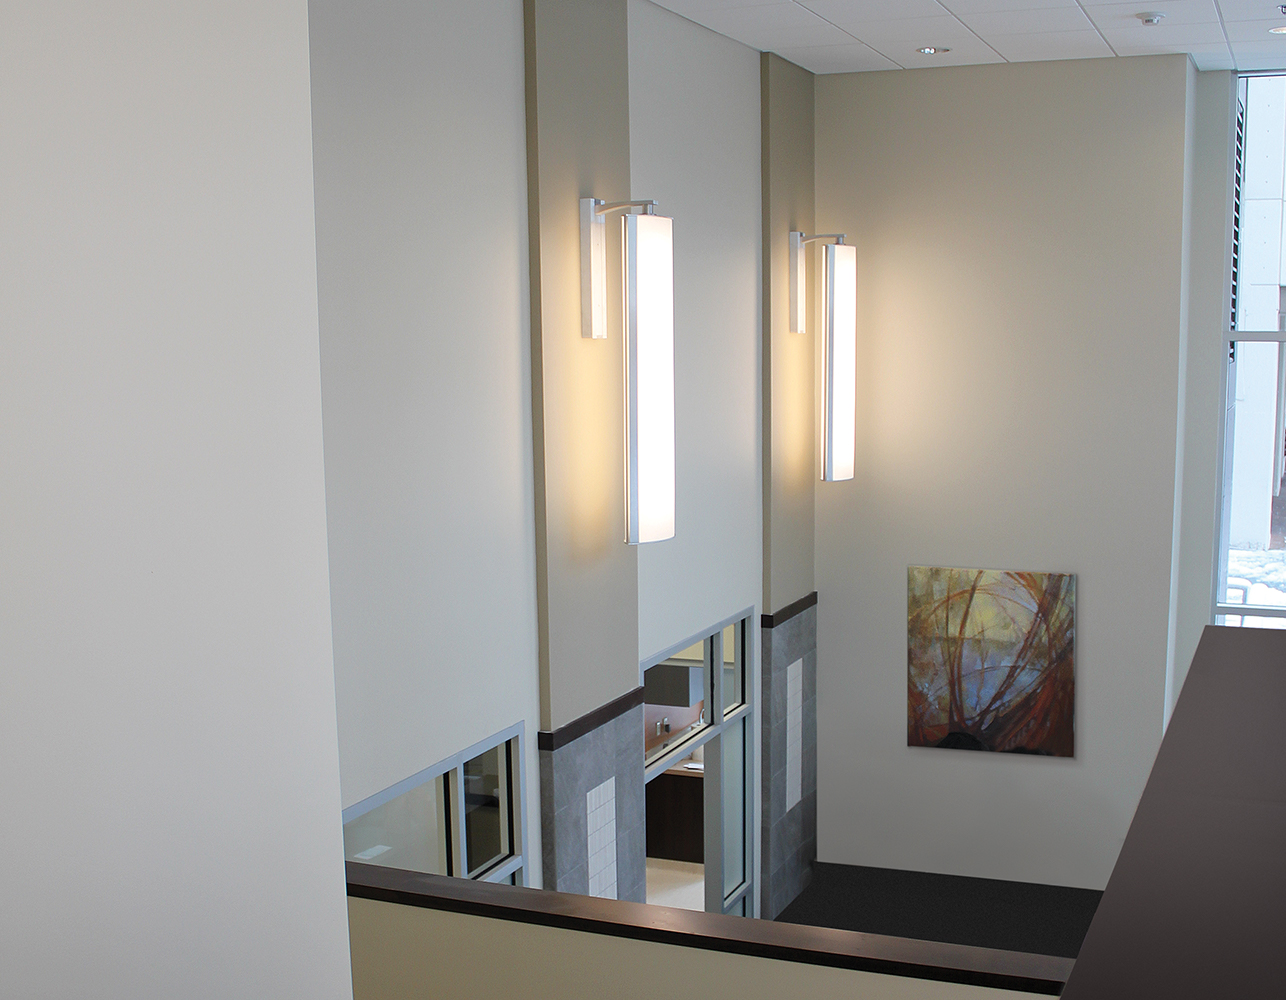 Air Foil pendants can complement healthcare design in lobbies, shown here as a sconce above doorways.